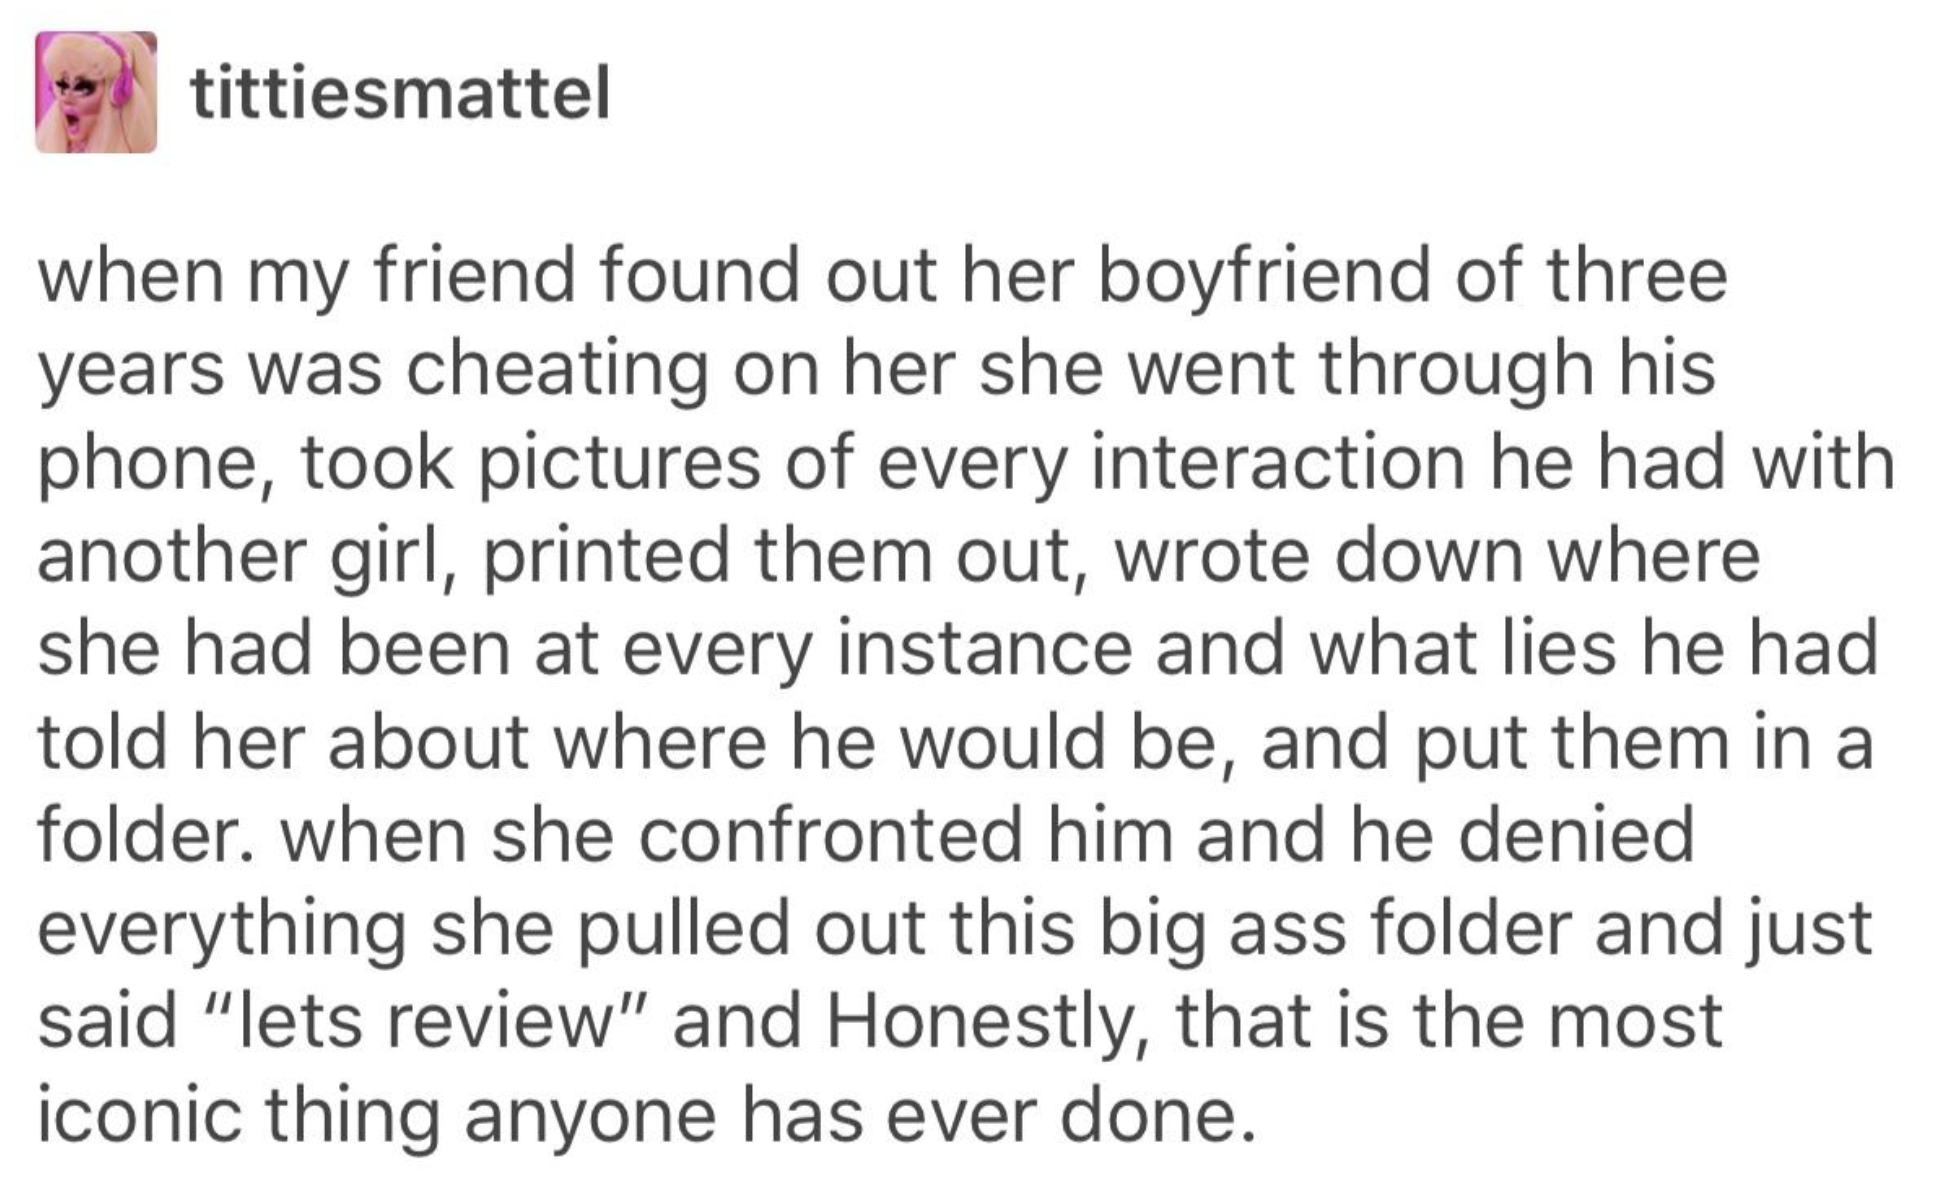 A Tumblr post about making a binder to prove someone was cheating